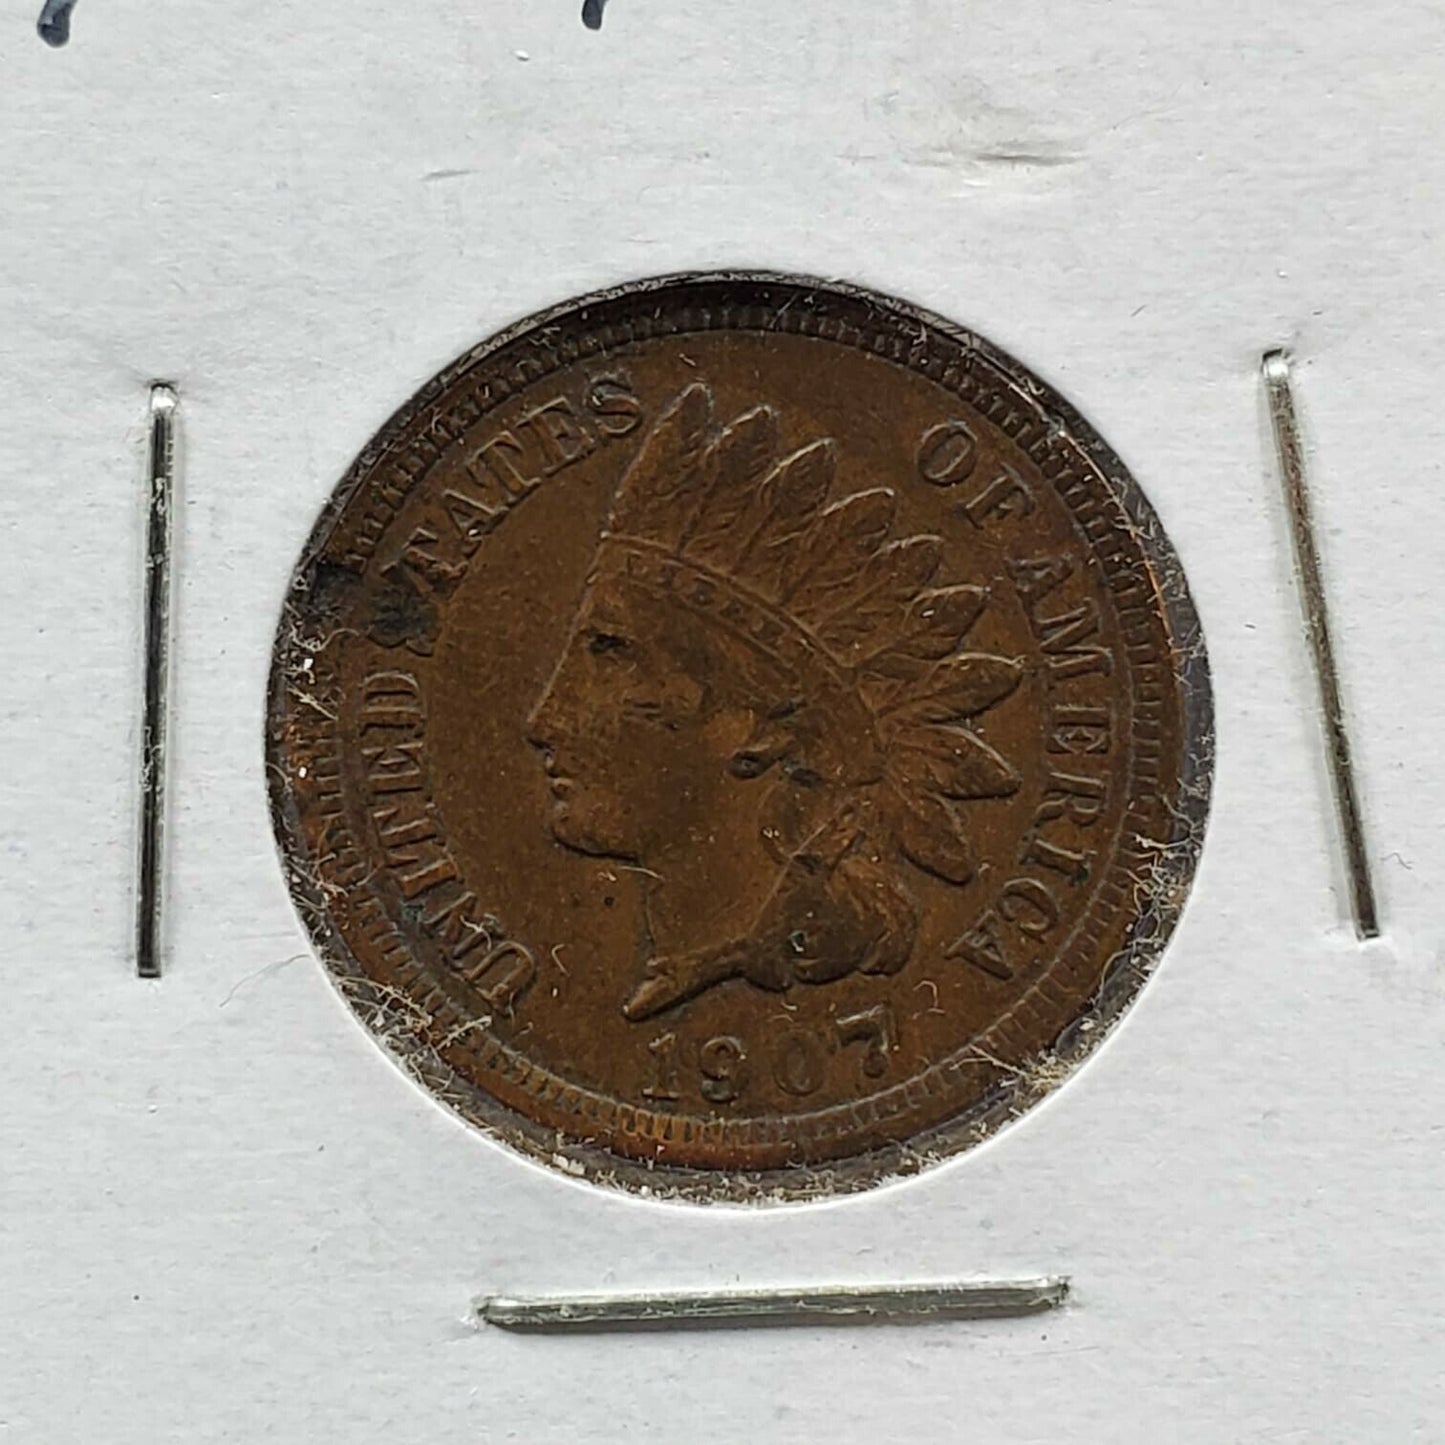 1907 Indian Head Cent Coin VF VERY FINE DETAILS